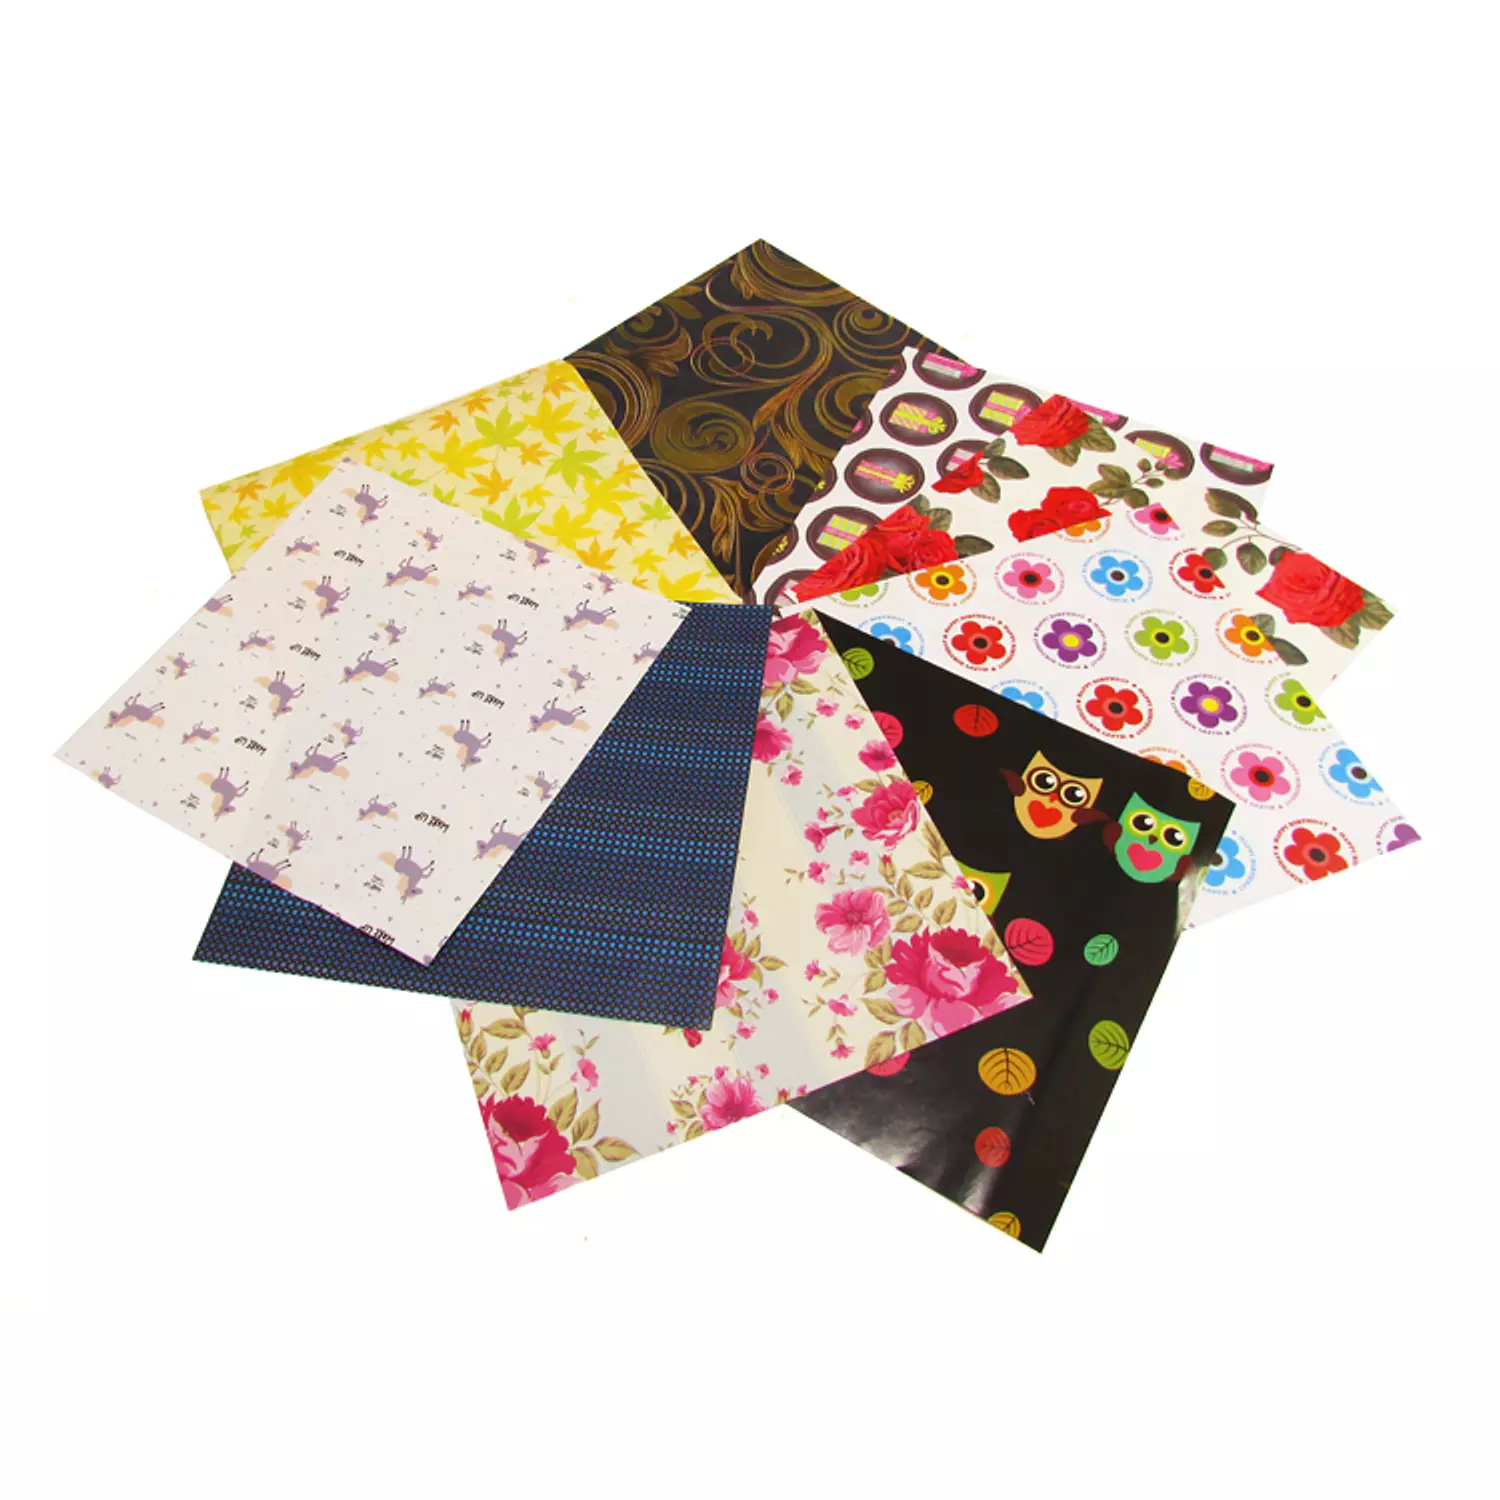 Packet of 50 printed origami papers  hover image